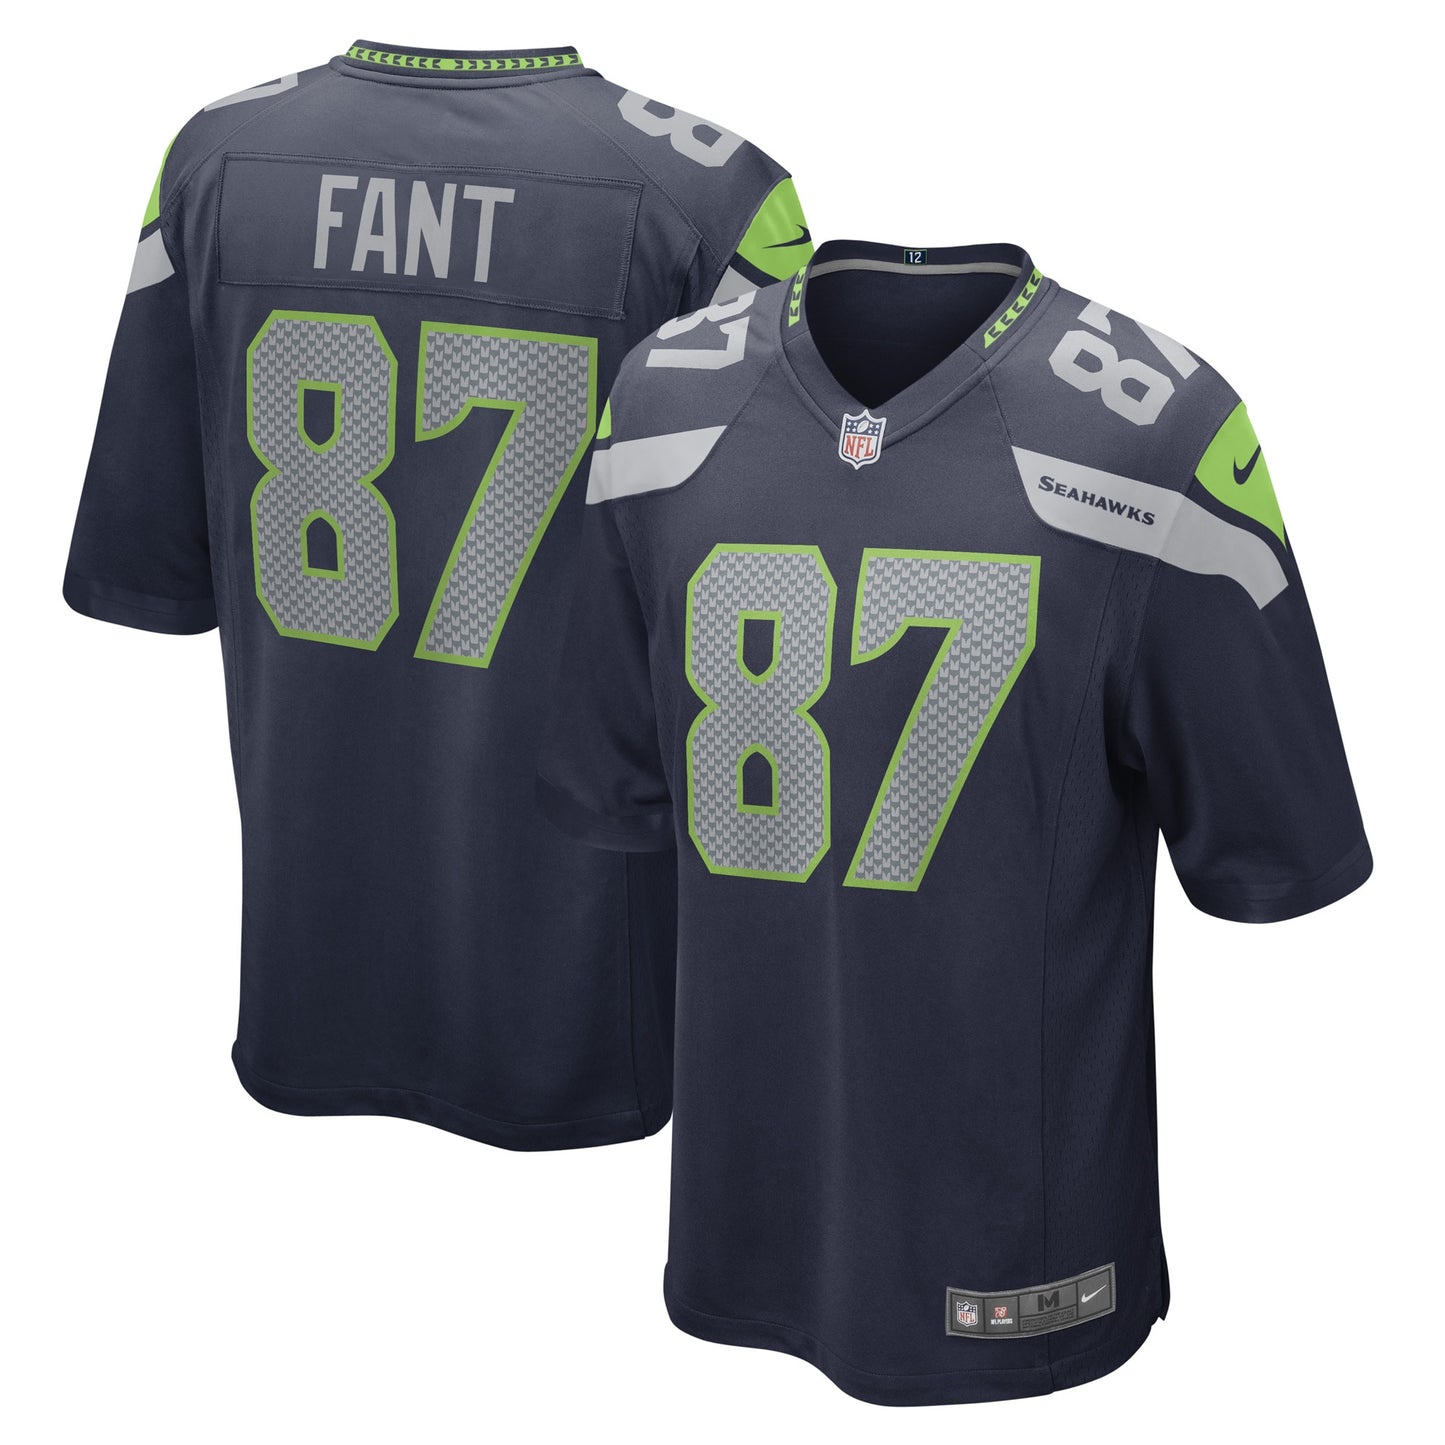 Noah Fant Seattle Seahawks Nike Game Player Jersey - College Navy